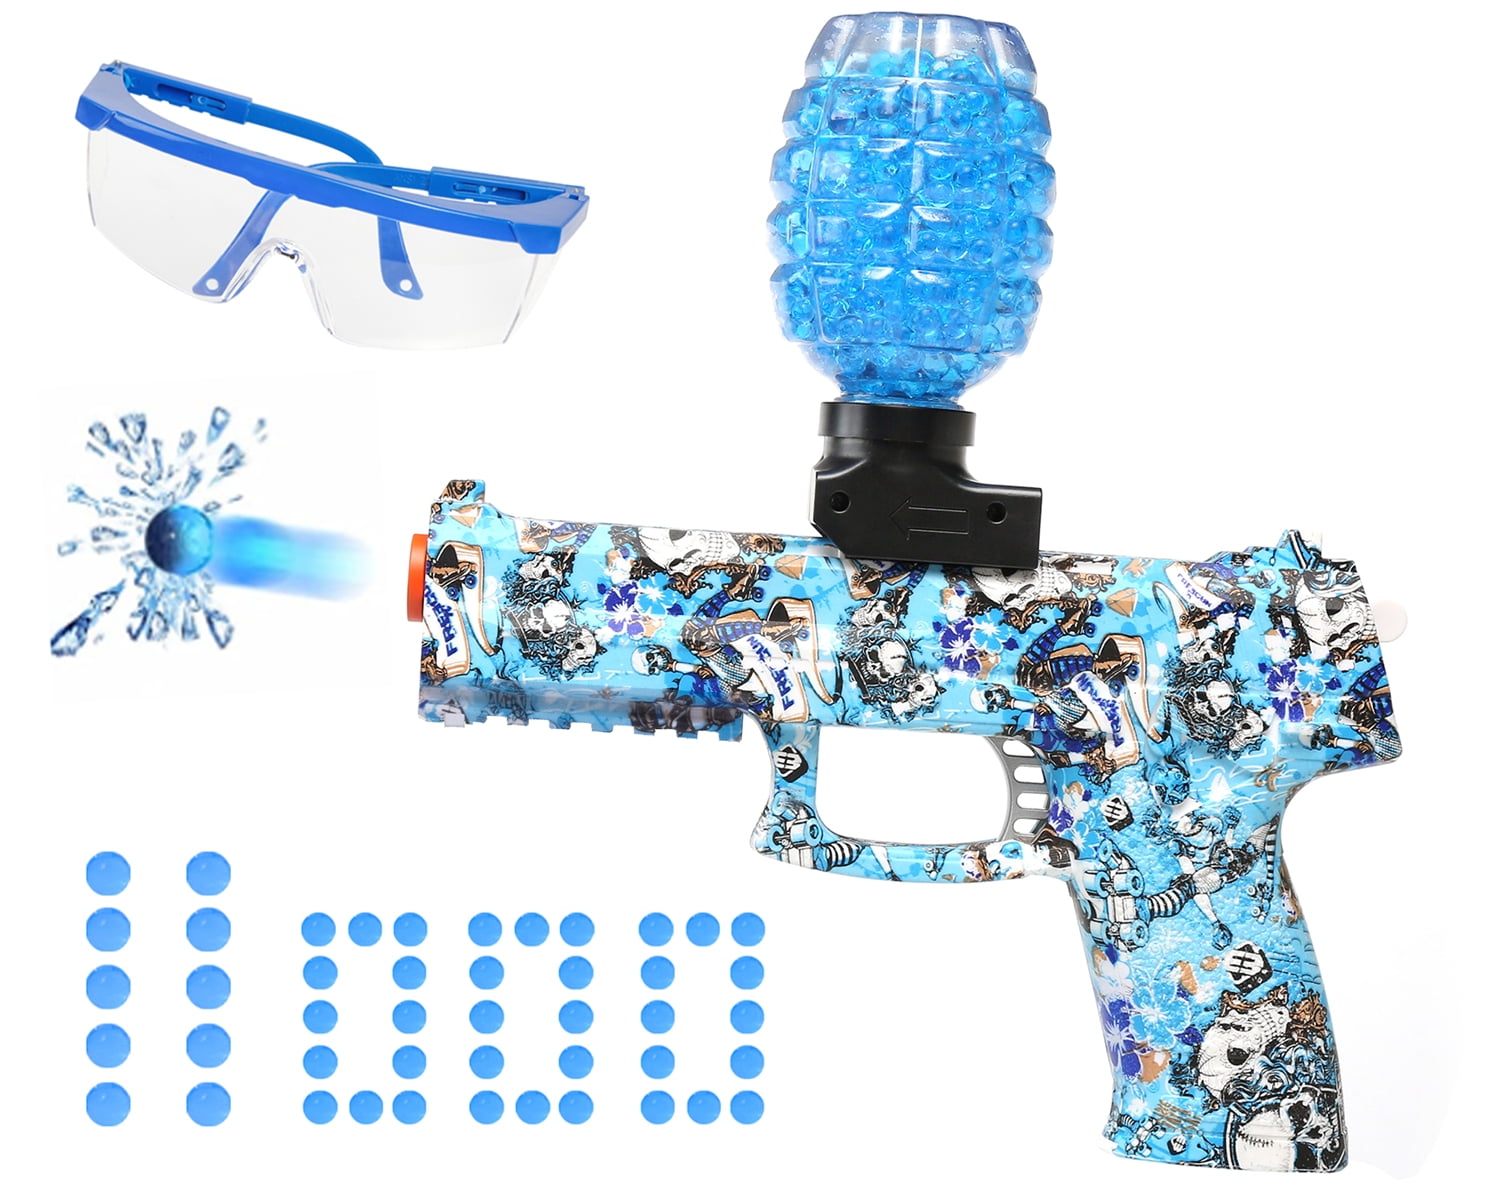 High Speed Automatic Splatter Gel Ball Blaster Blaster with 11000 Water Beads and Goggles for Outdoor Activities Shooting Game Gifts for Boys and Girls Ages 12+